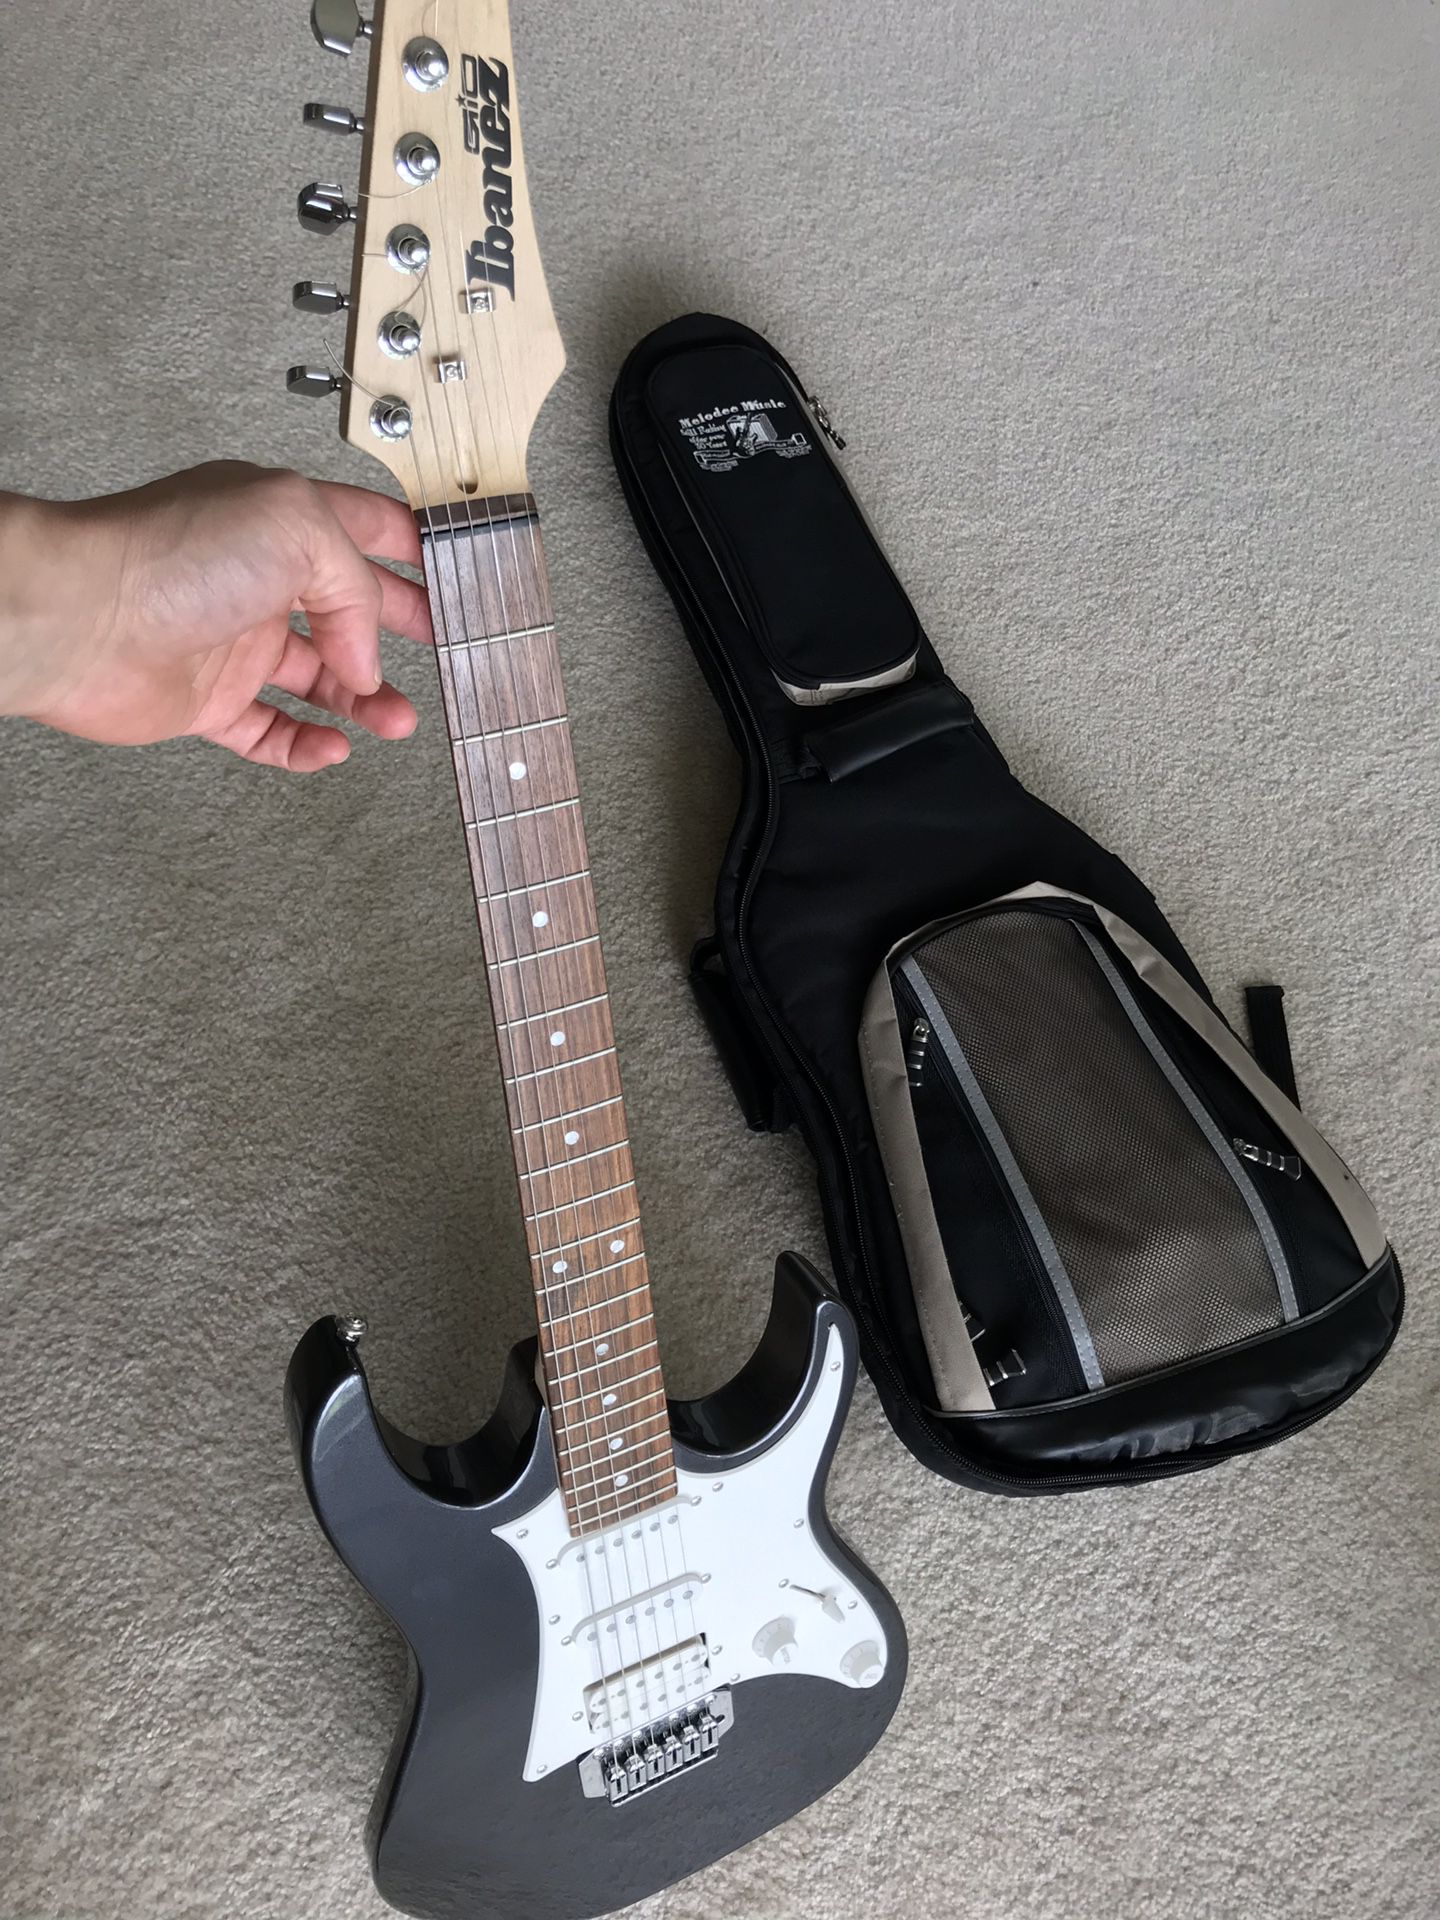 Ibanez electric guitar w/ case